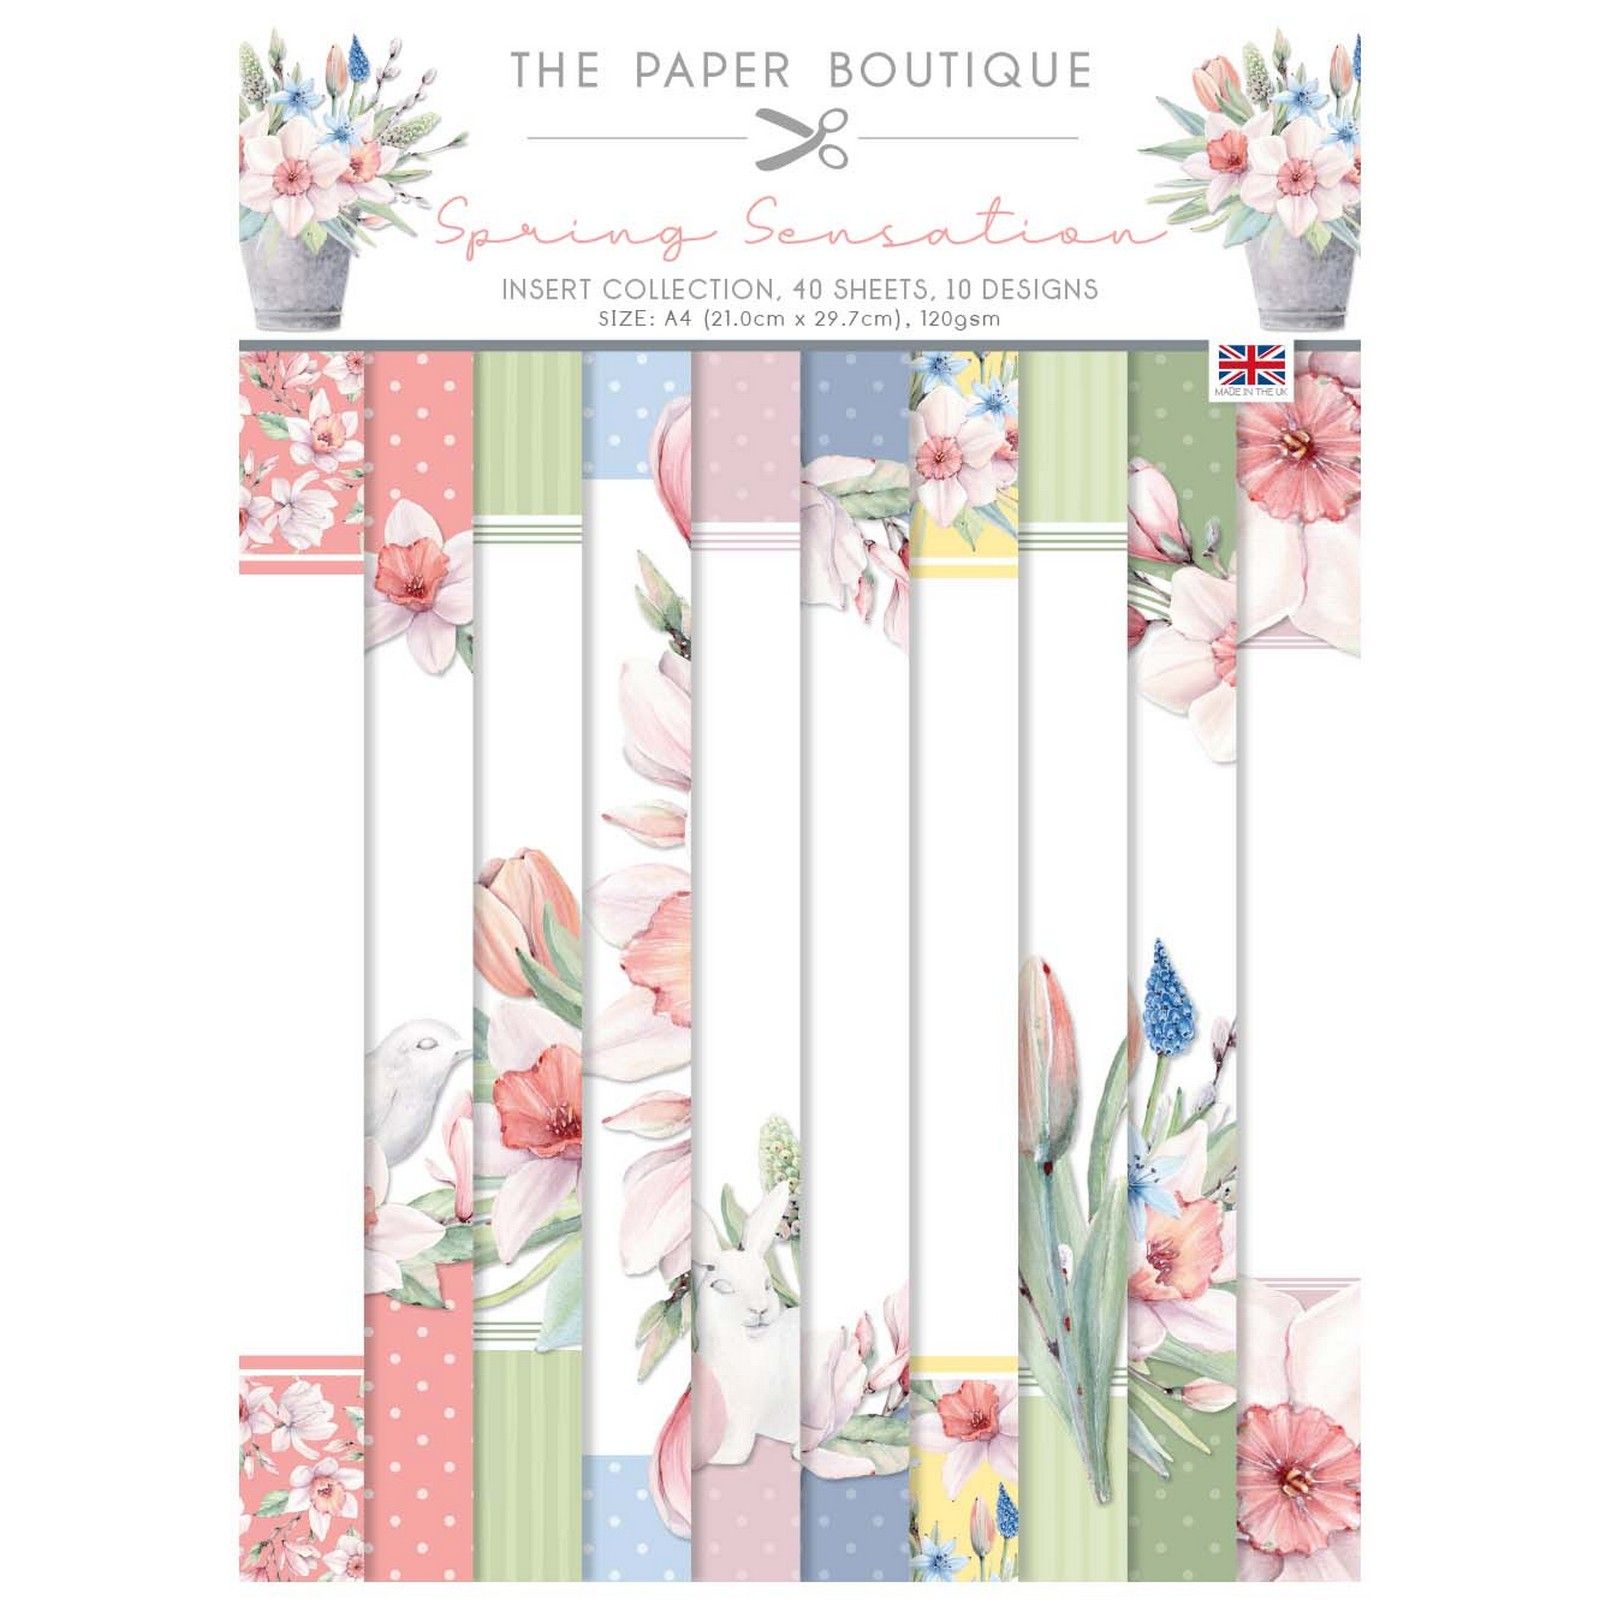 The Paper Boutique • Spring Sensation Insert Collection